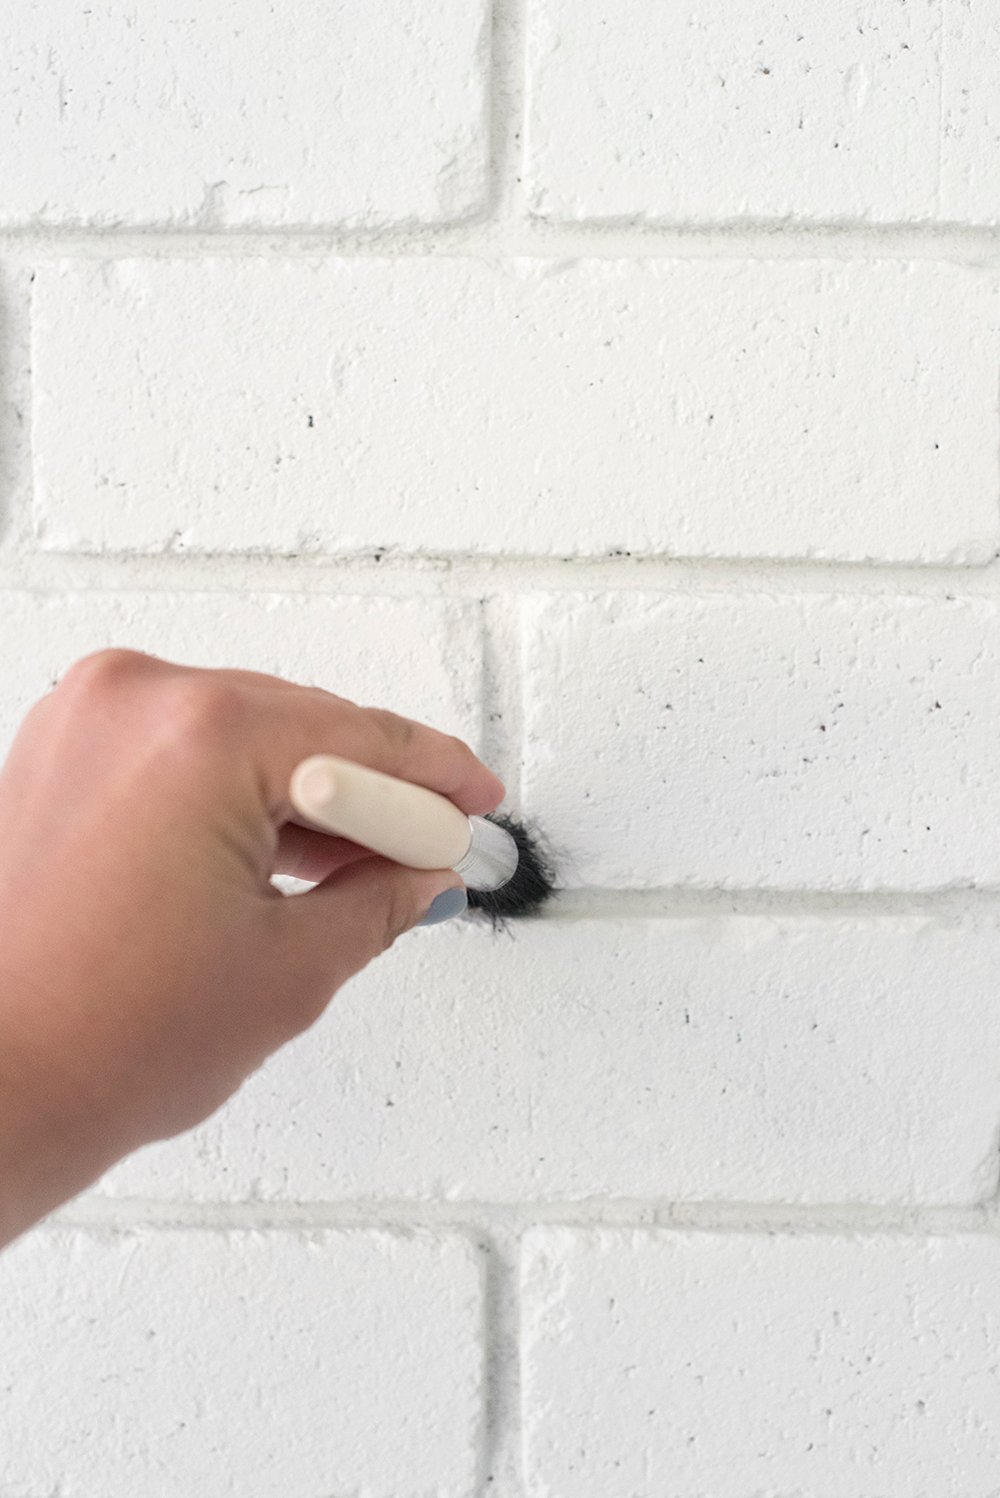 How to Paint Exterior Brick - roomfortuesday.com